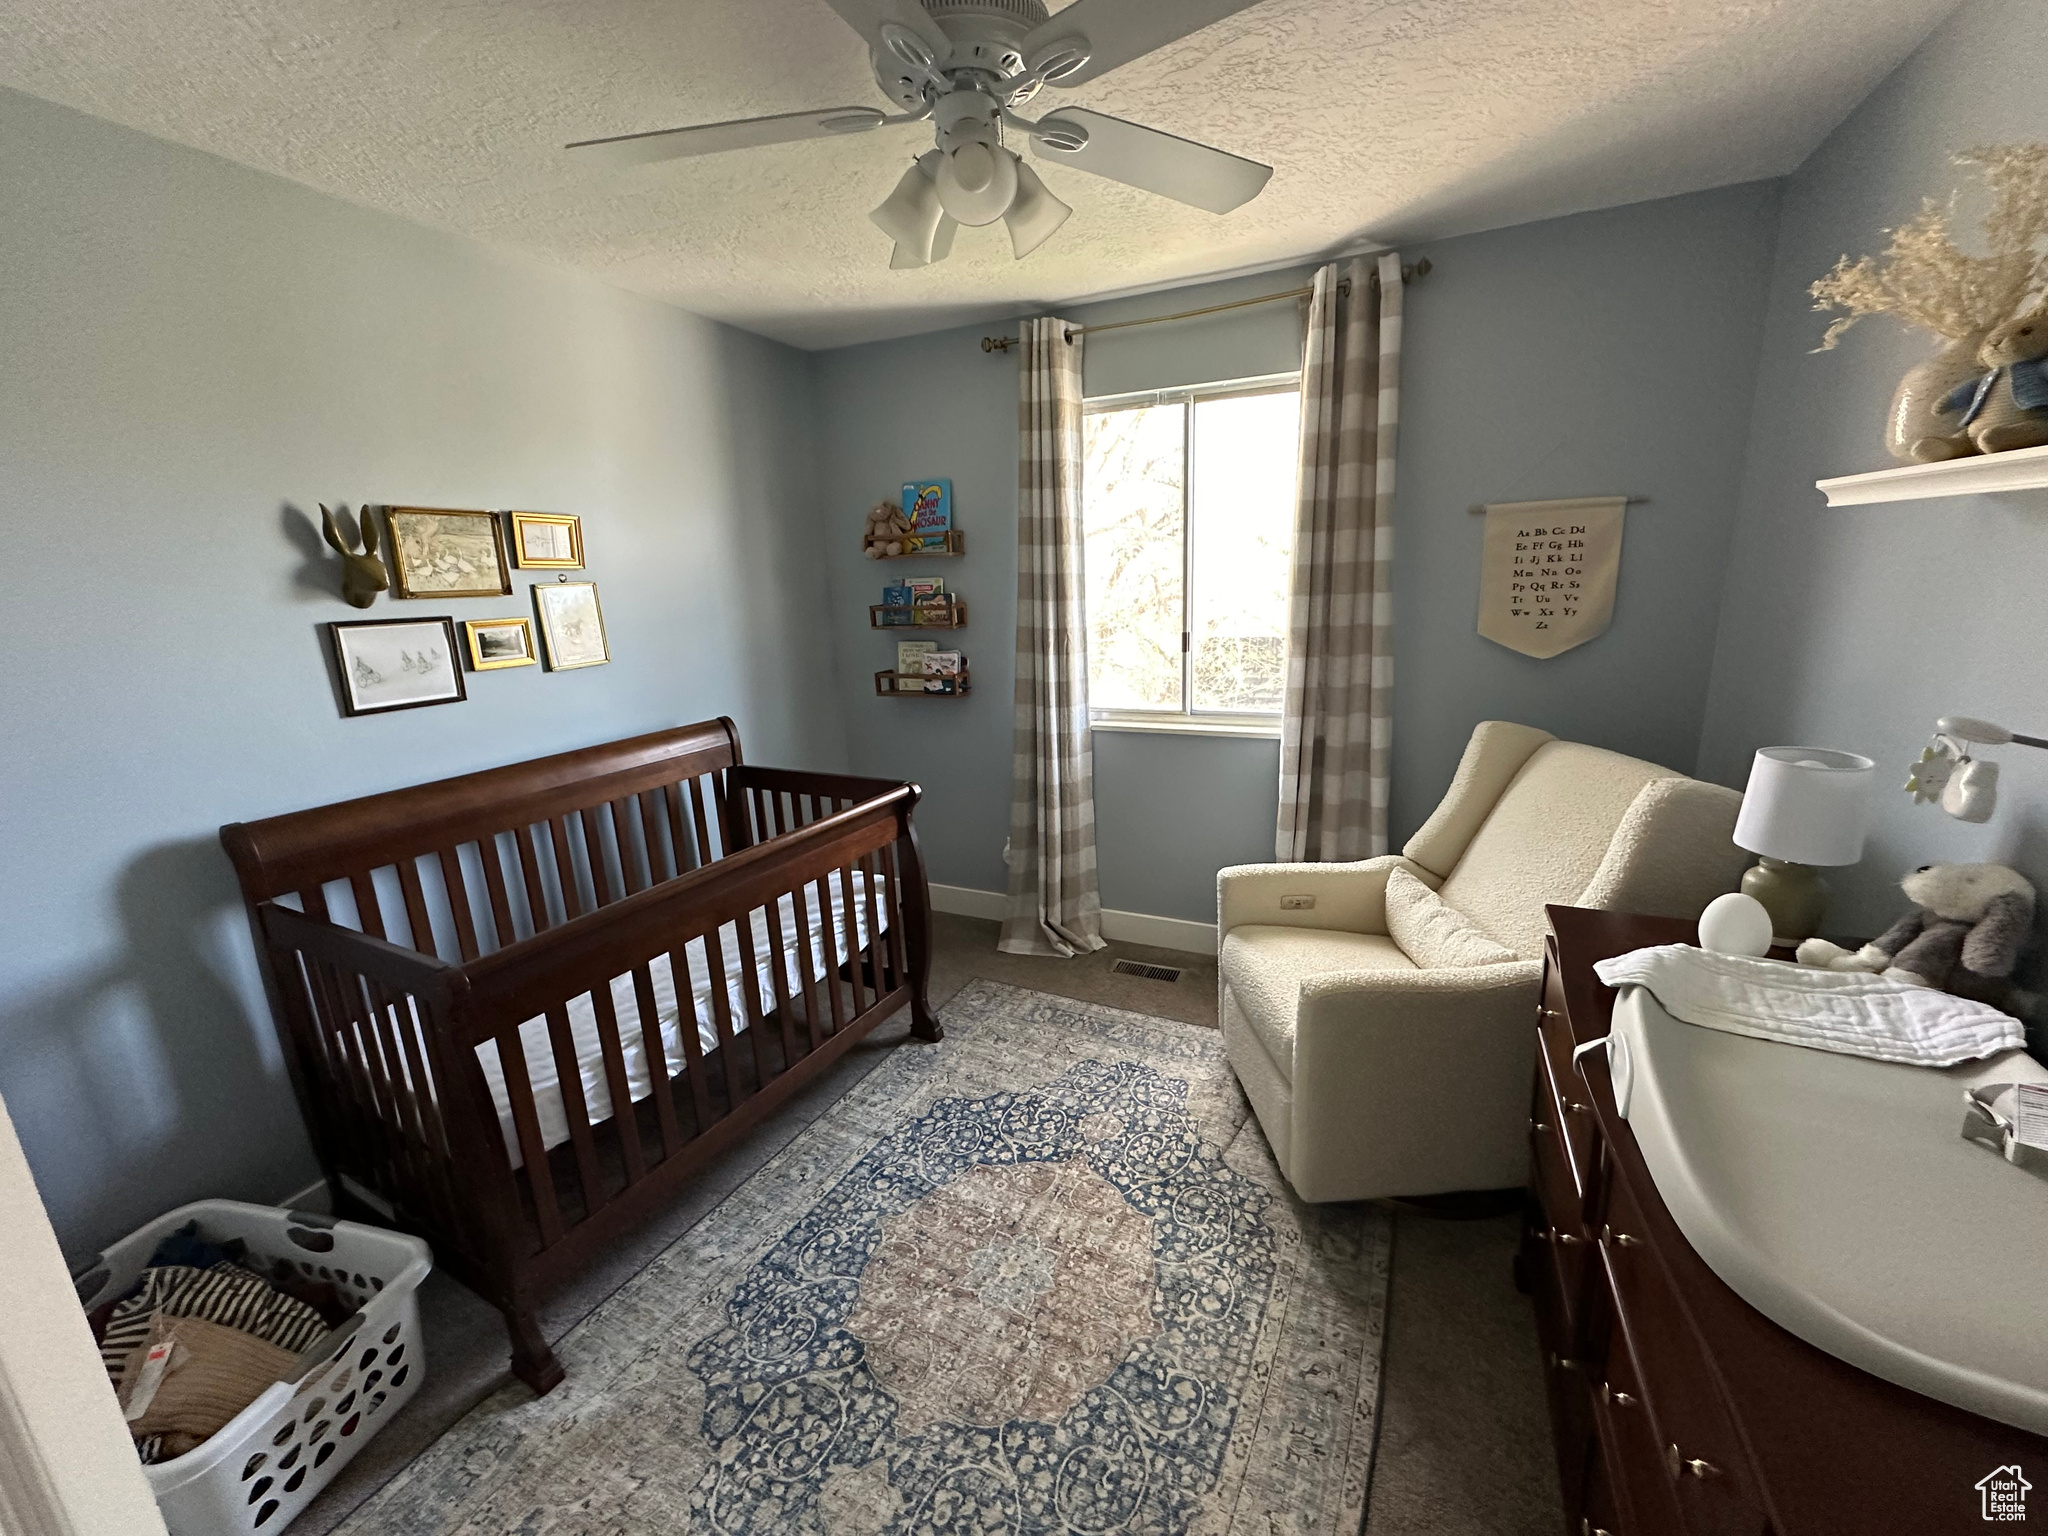 Bedroom with a textured ceiling, carpet floors, ceiling fan, and a nursery area